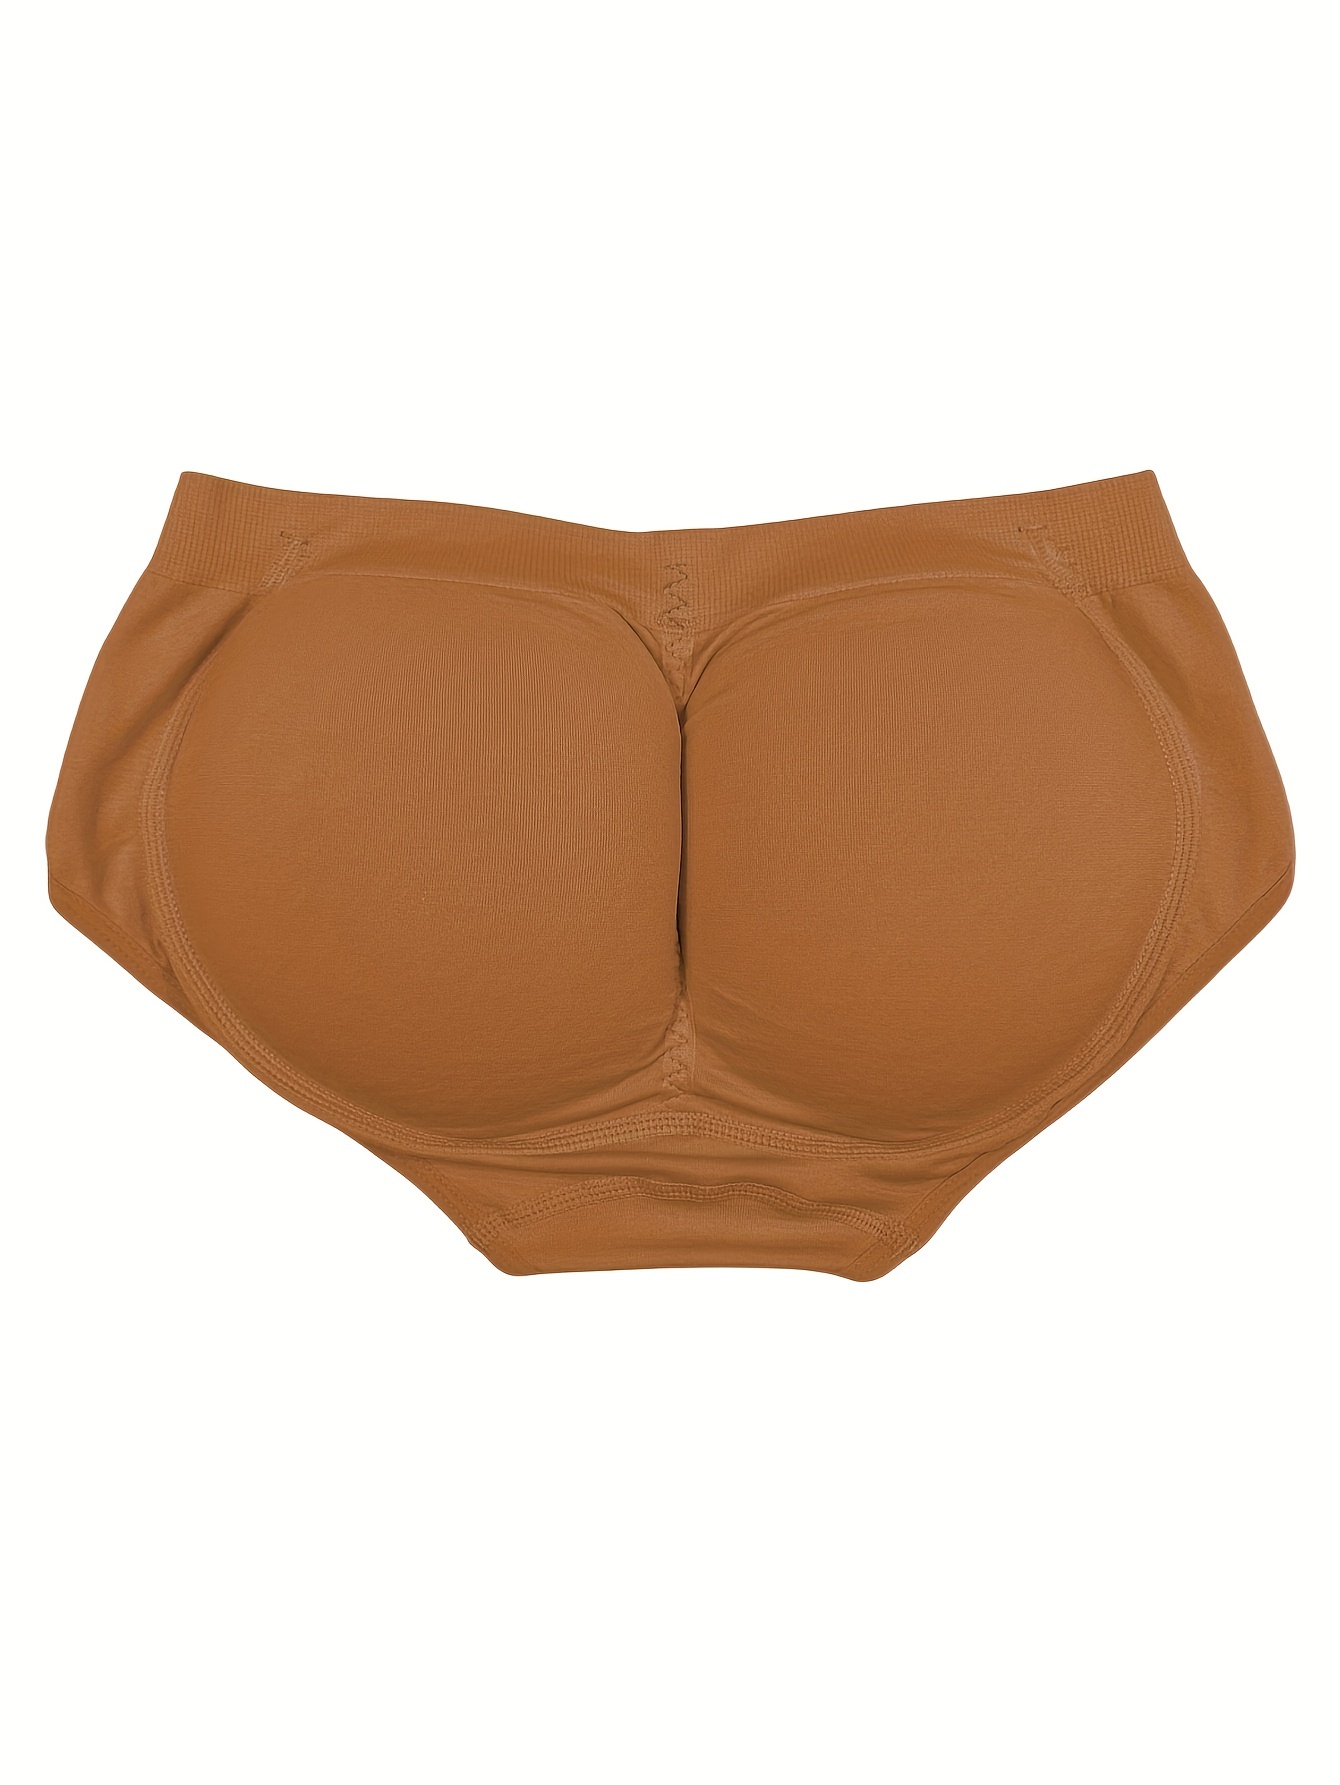 Removable Padded Panty Bum Enhancing Underwear